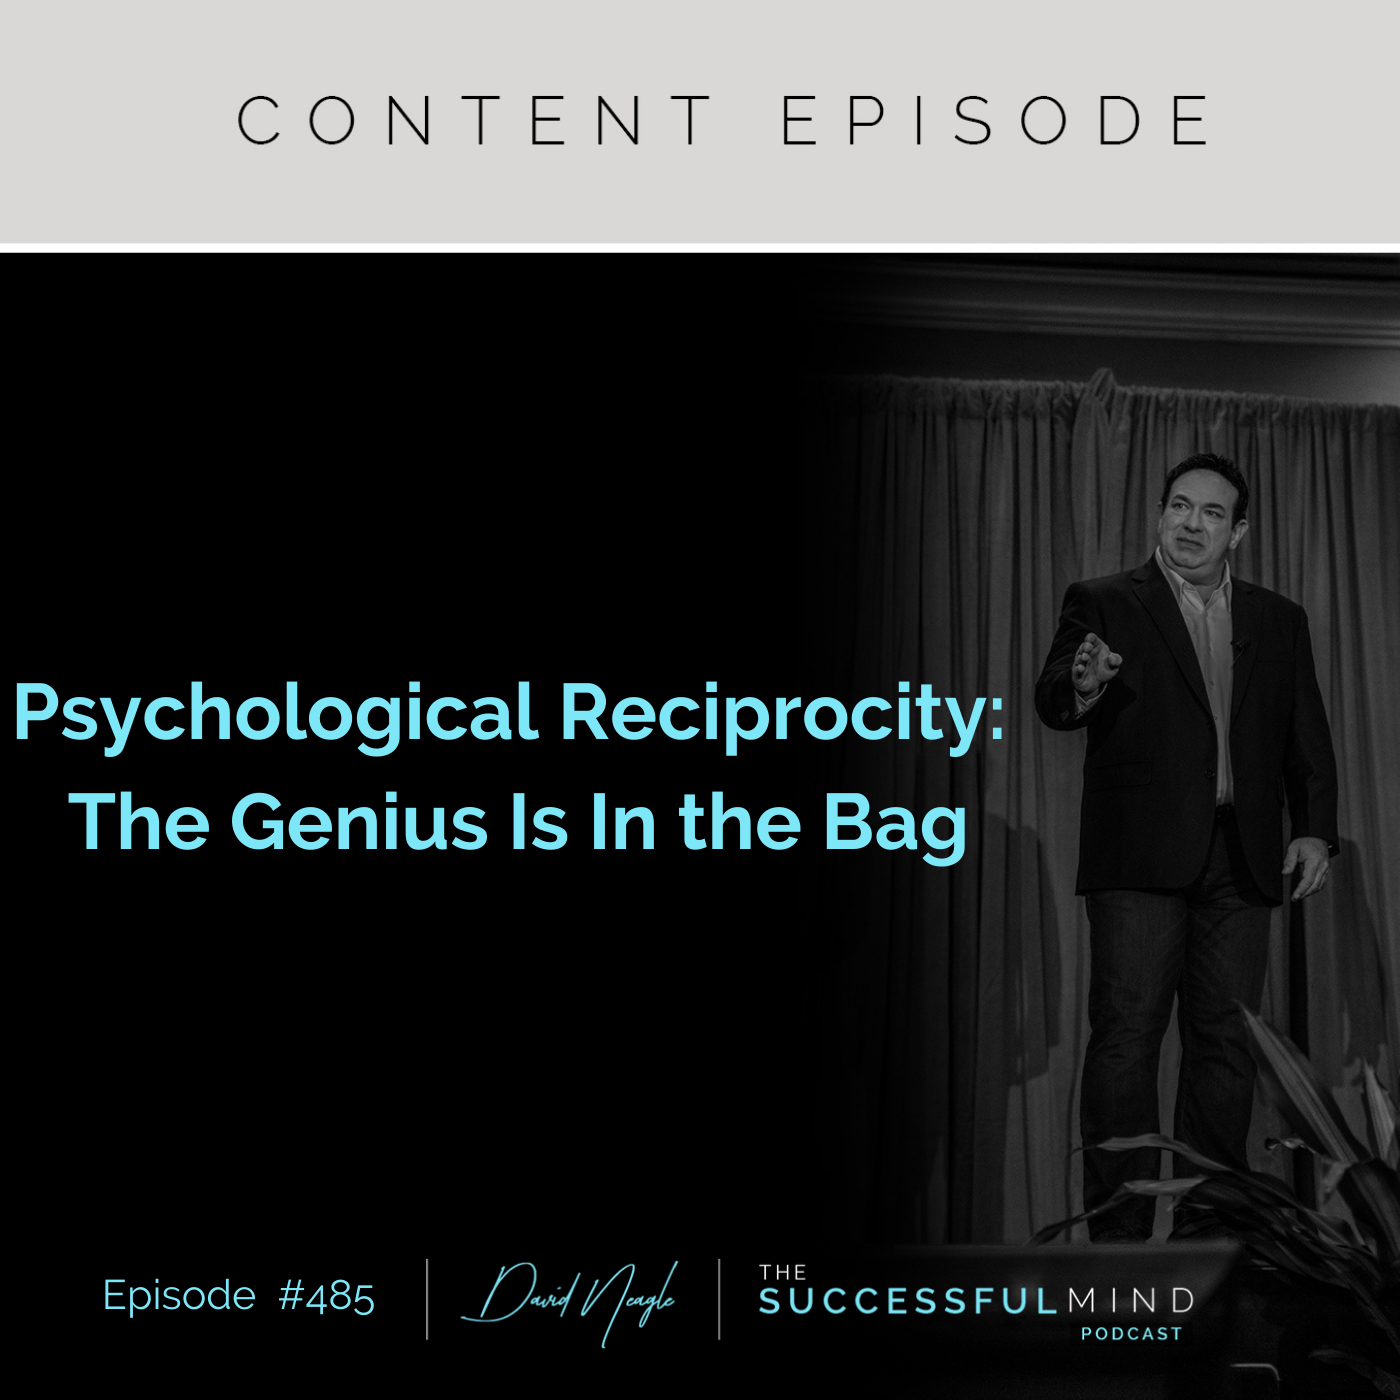 The Successful Mind Podcast - Episode 485 - Psychological Reciprocity